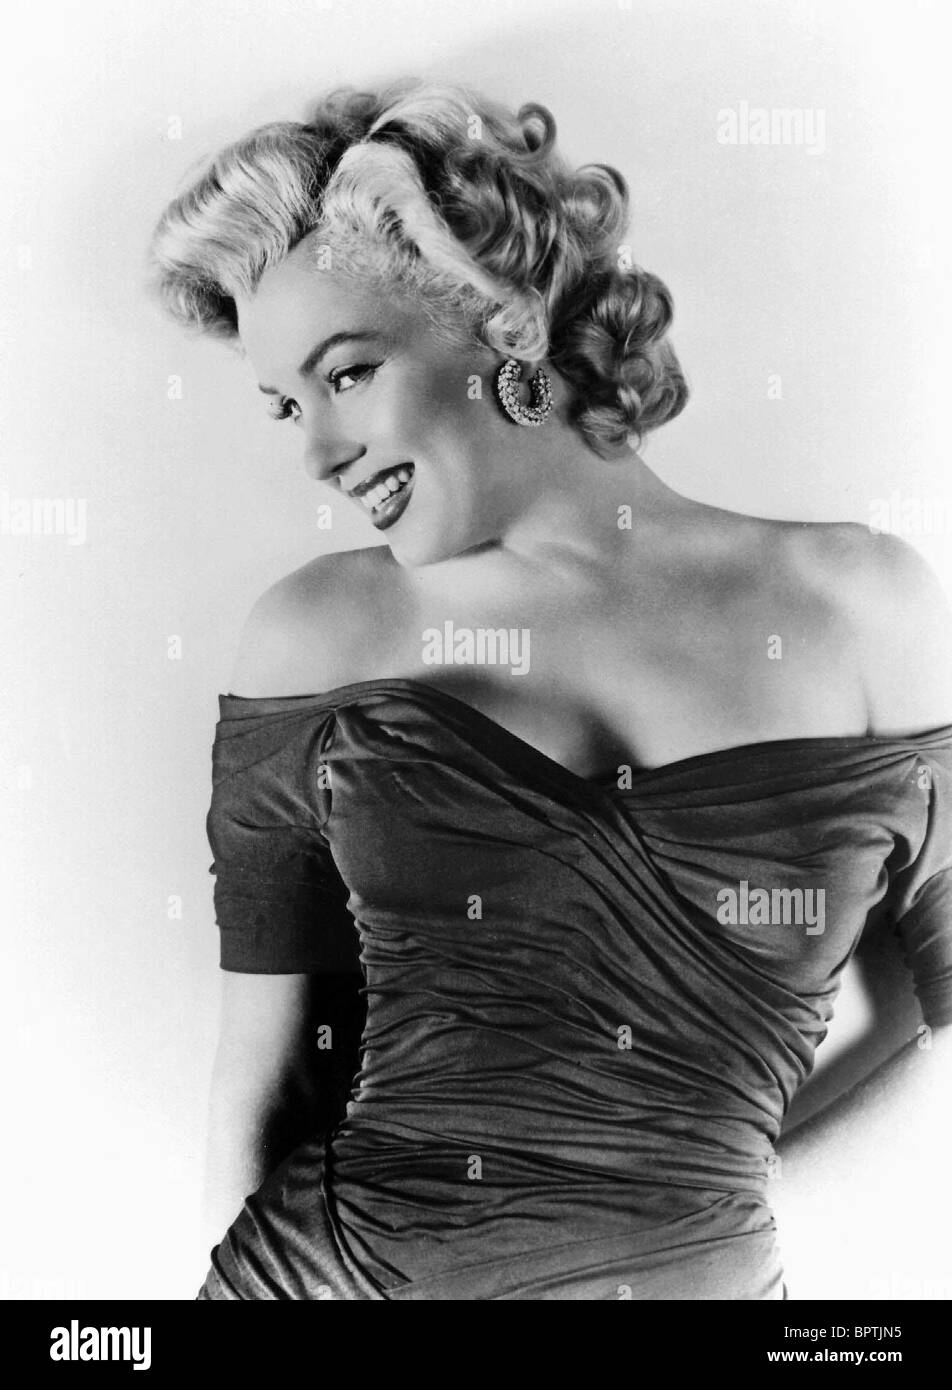 L'ACTRICE MARILYN MONROE (1958) Banque D'Images